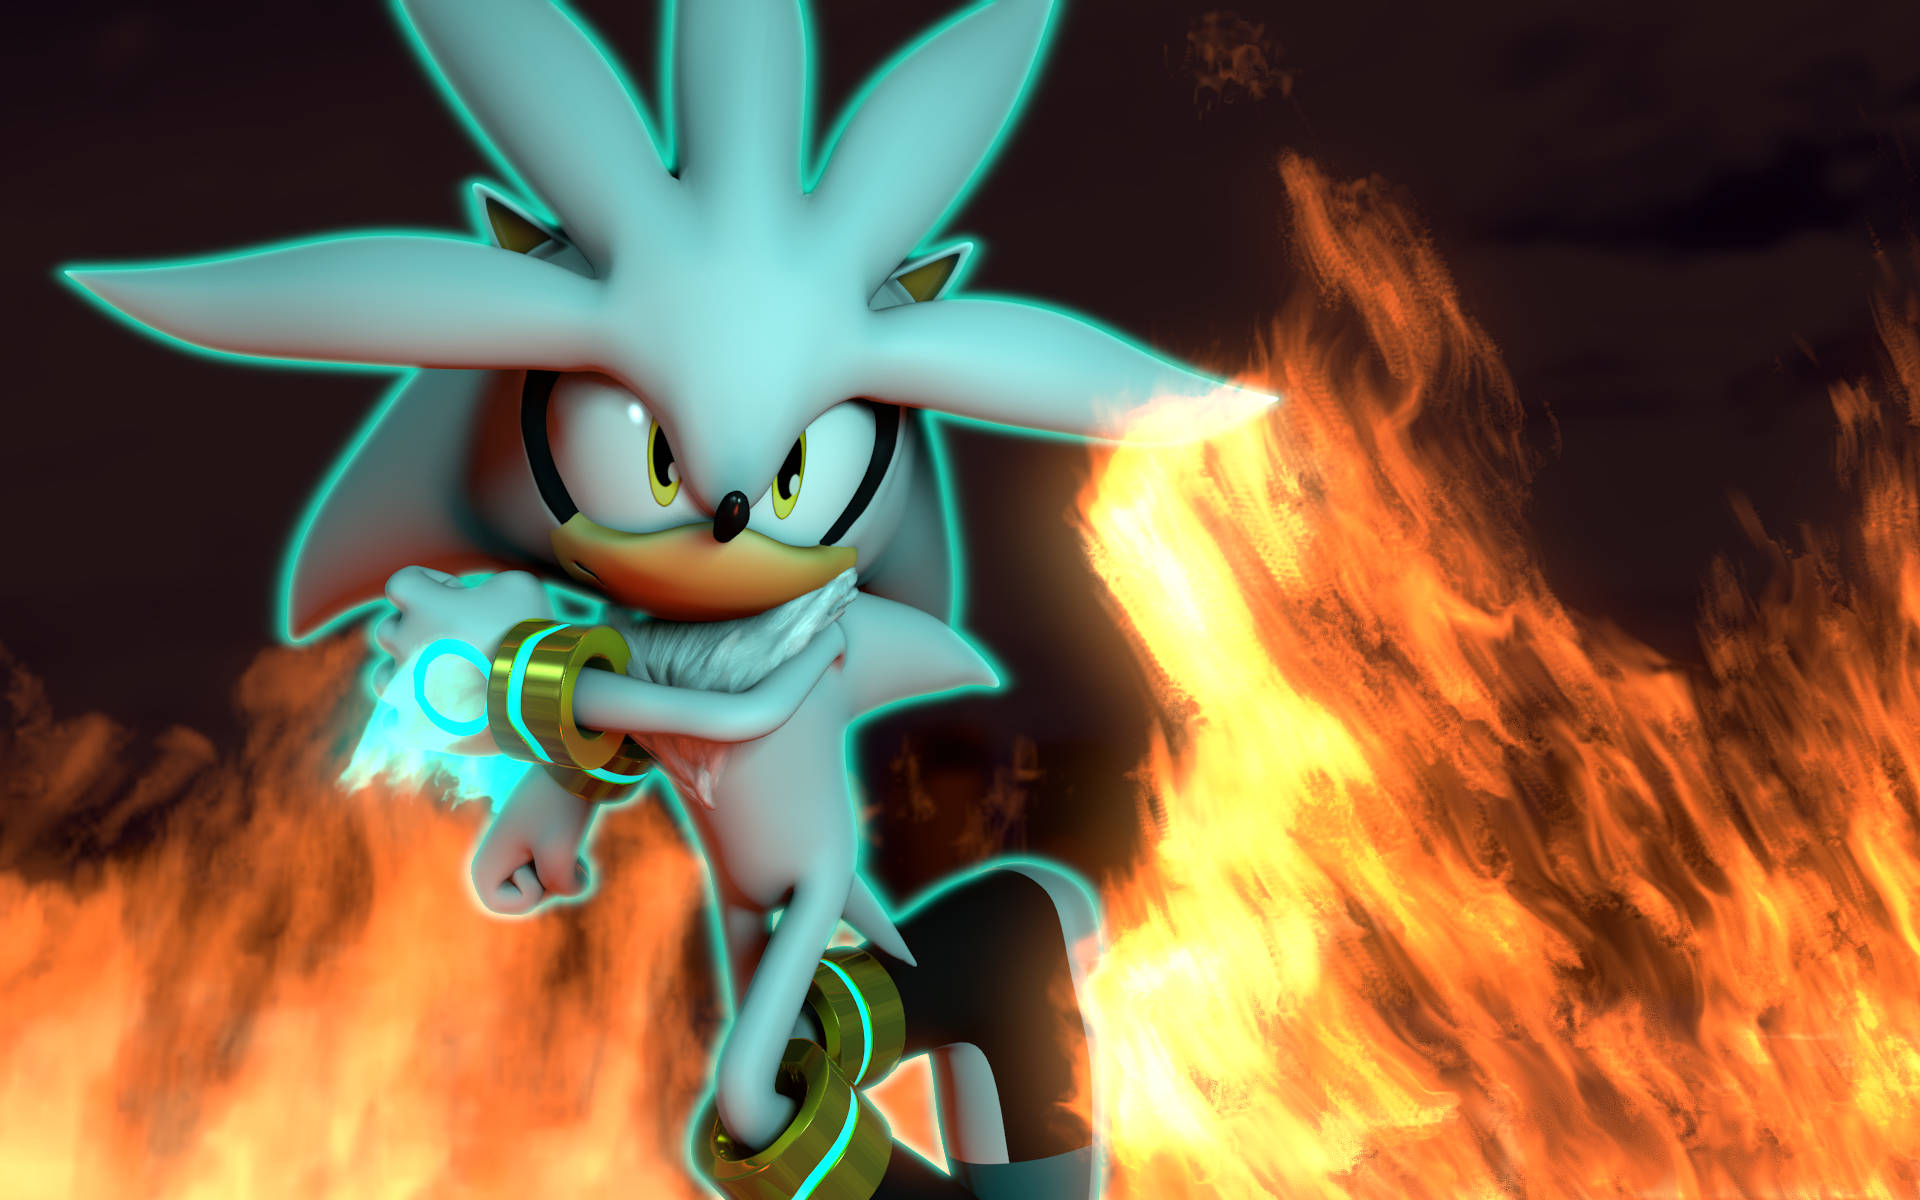 Dynamic Silver The Hedgehog In Action Wallpaper